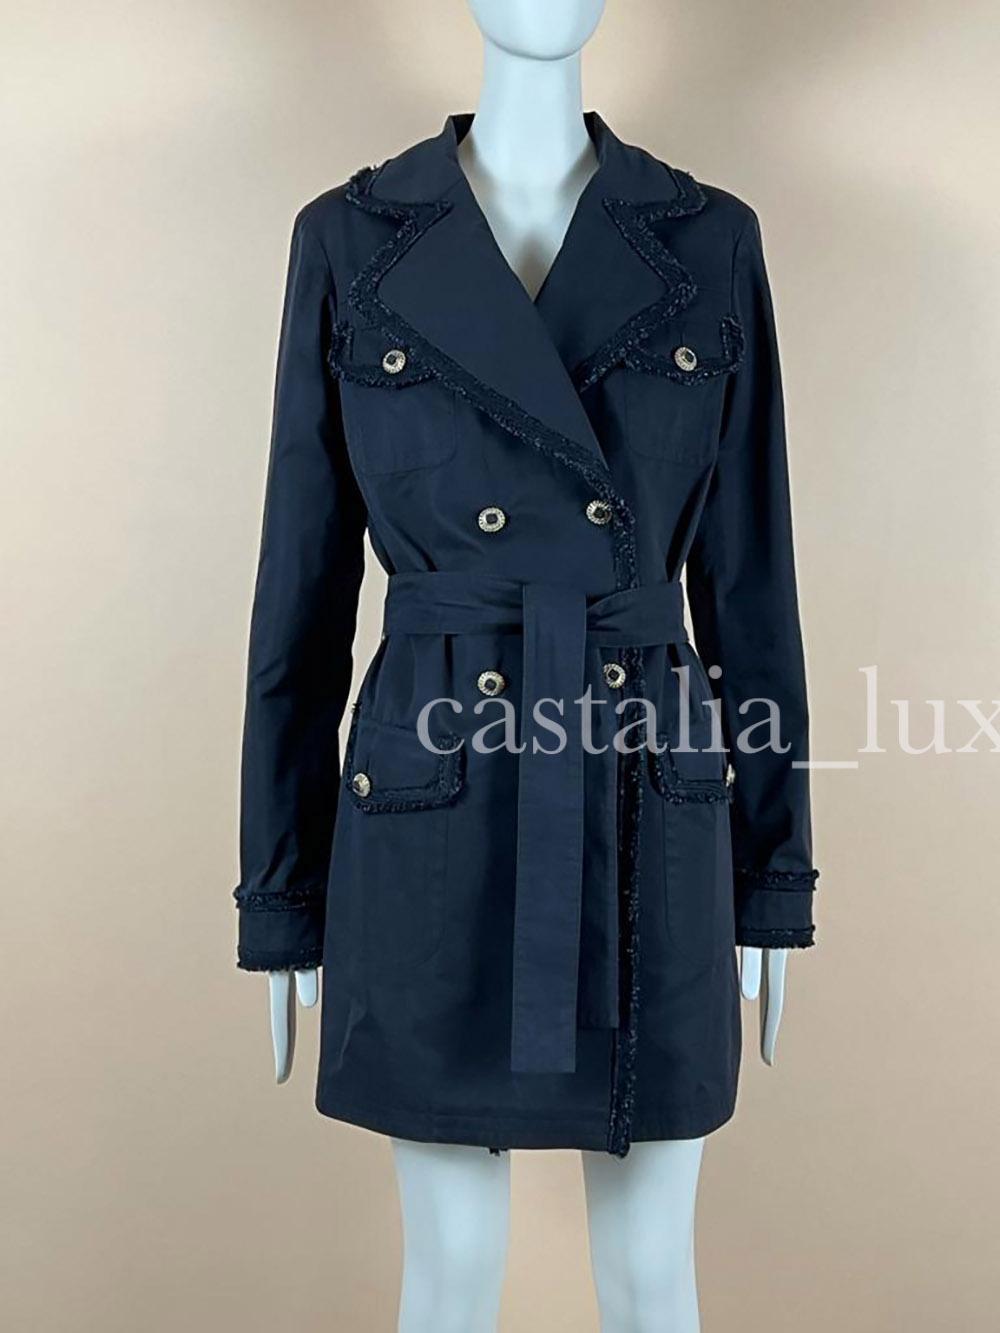 Chanel New CC Jewel Buttons Black Trench Coat In New Condition For Sale In Dubai, AE